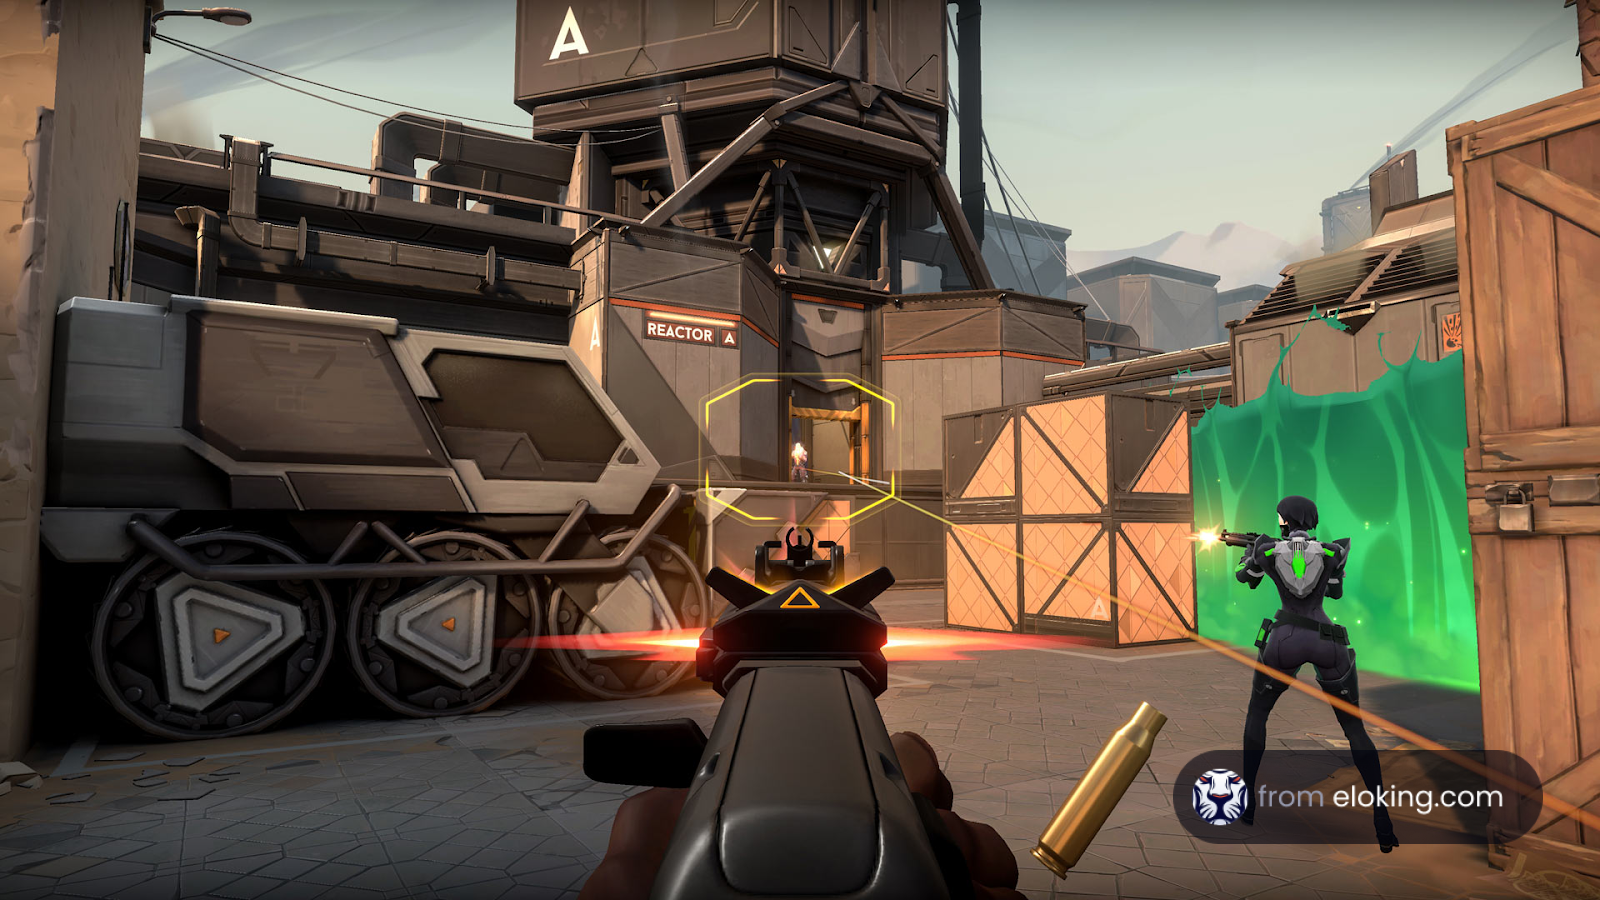 Player aiming in a tactical shooter game with futuristic urban setting